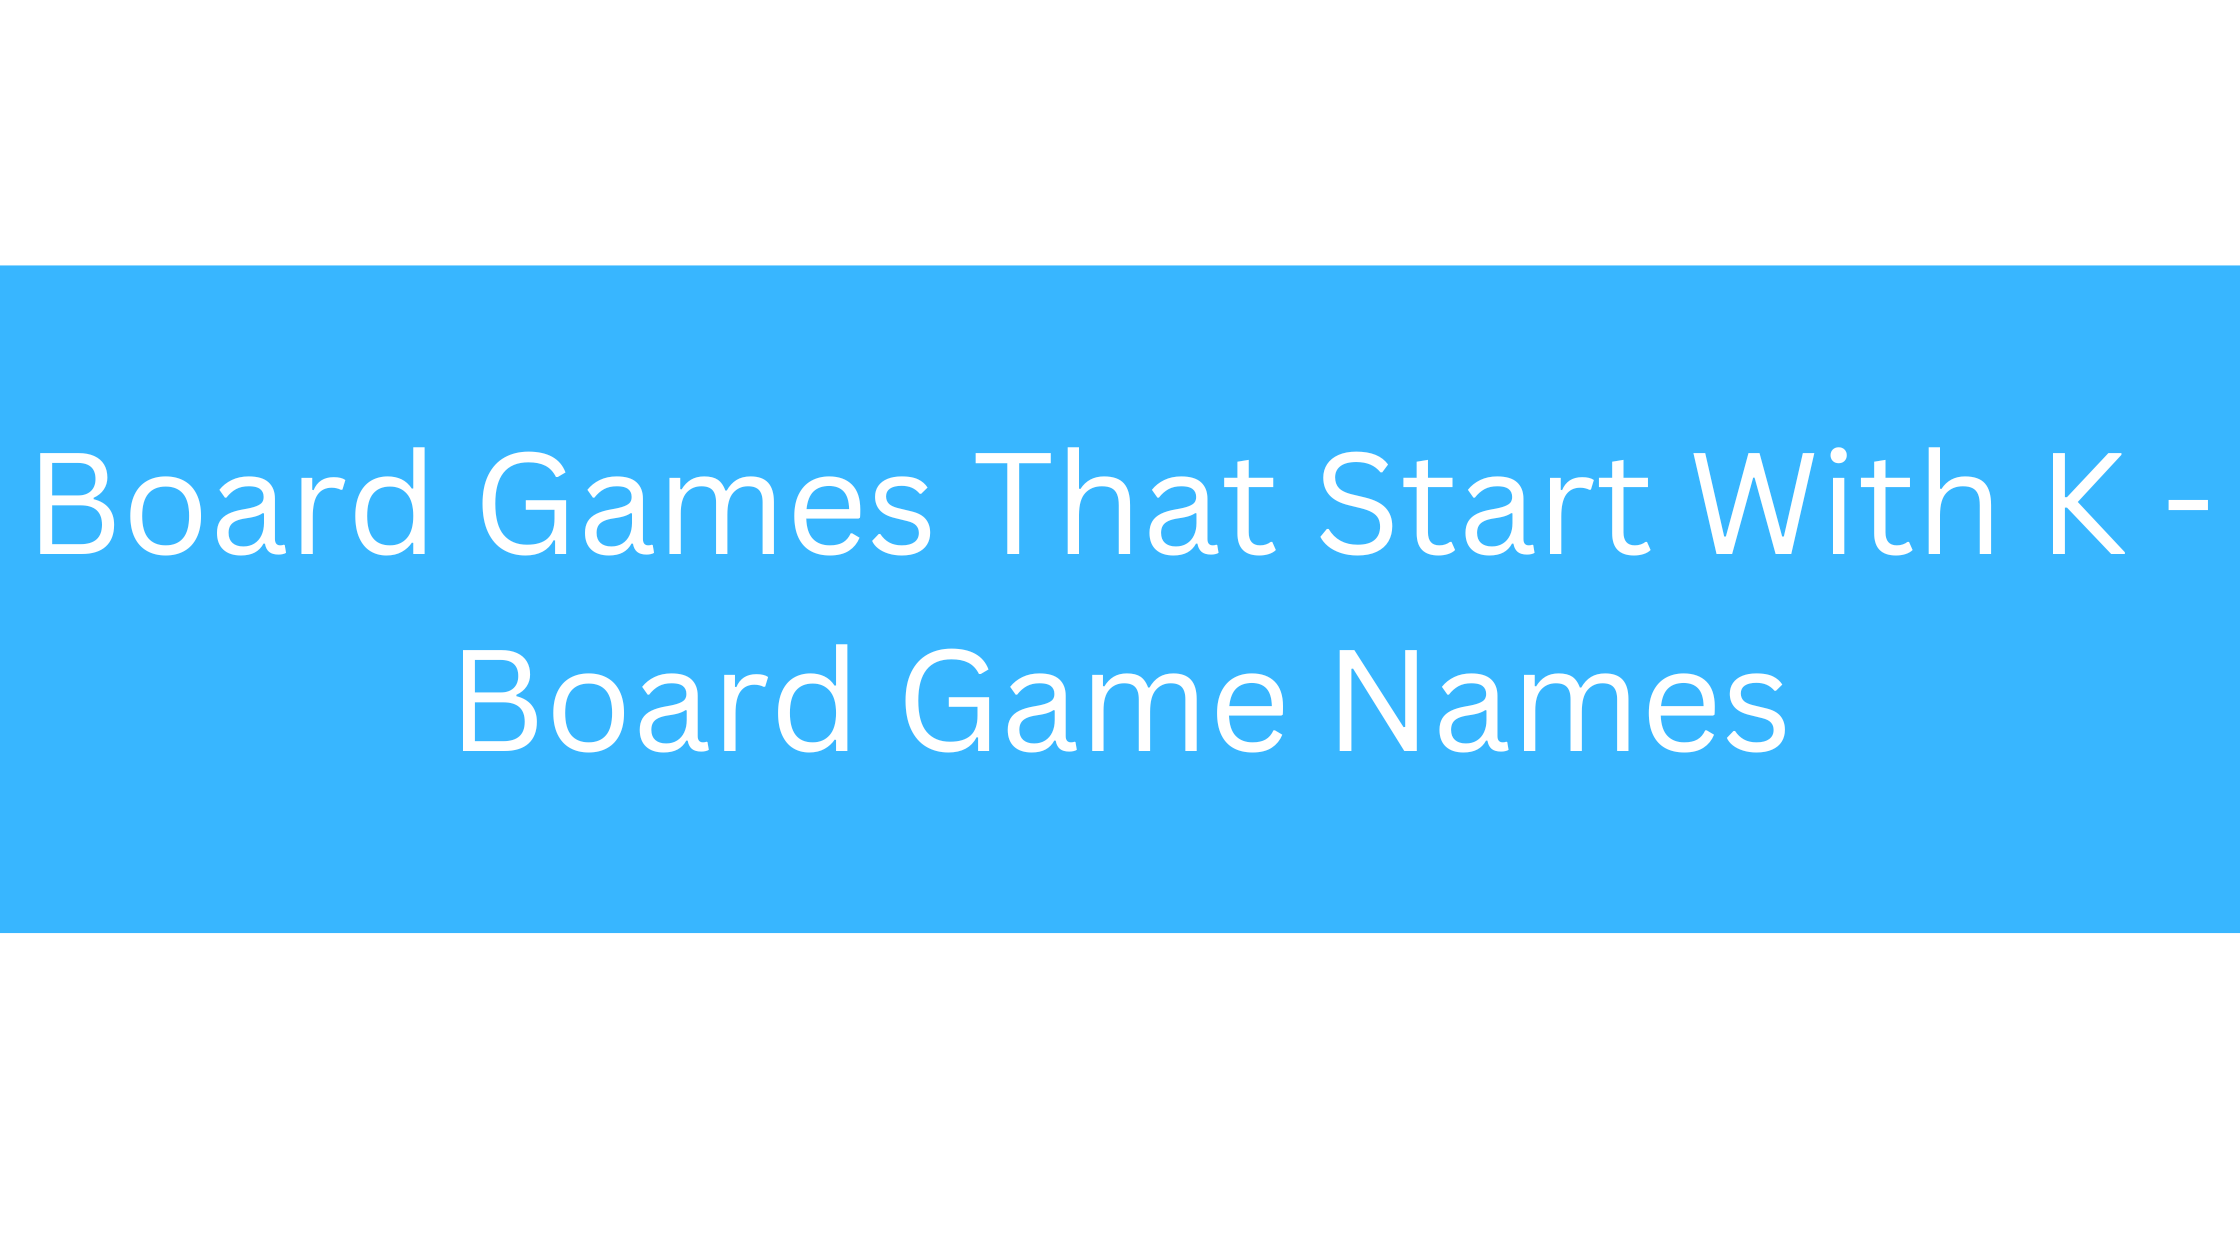 Board Games That Start With K